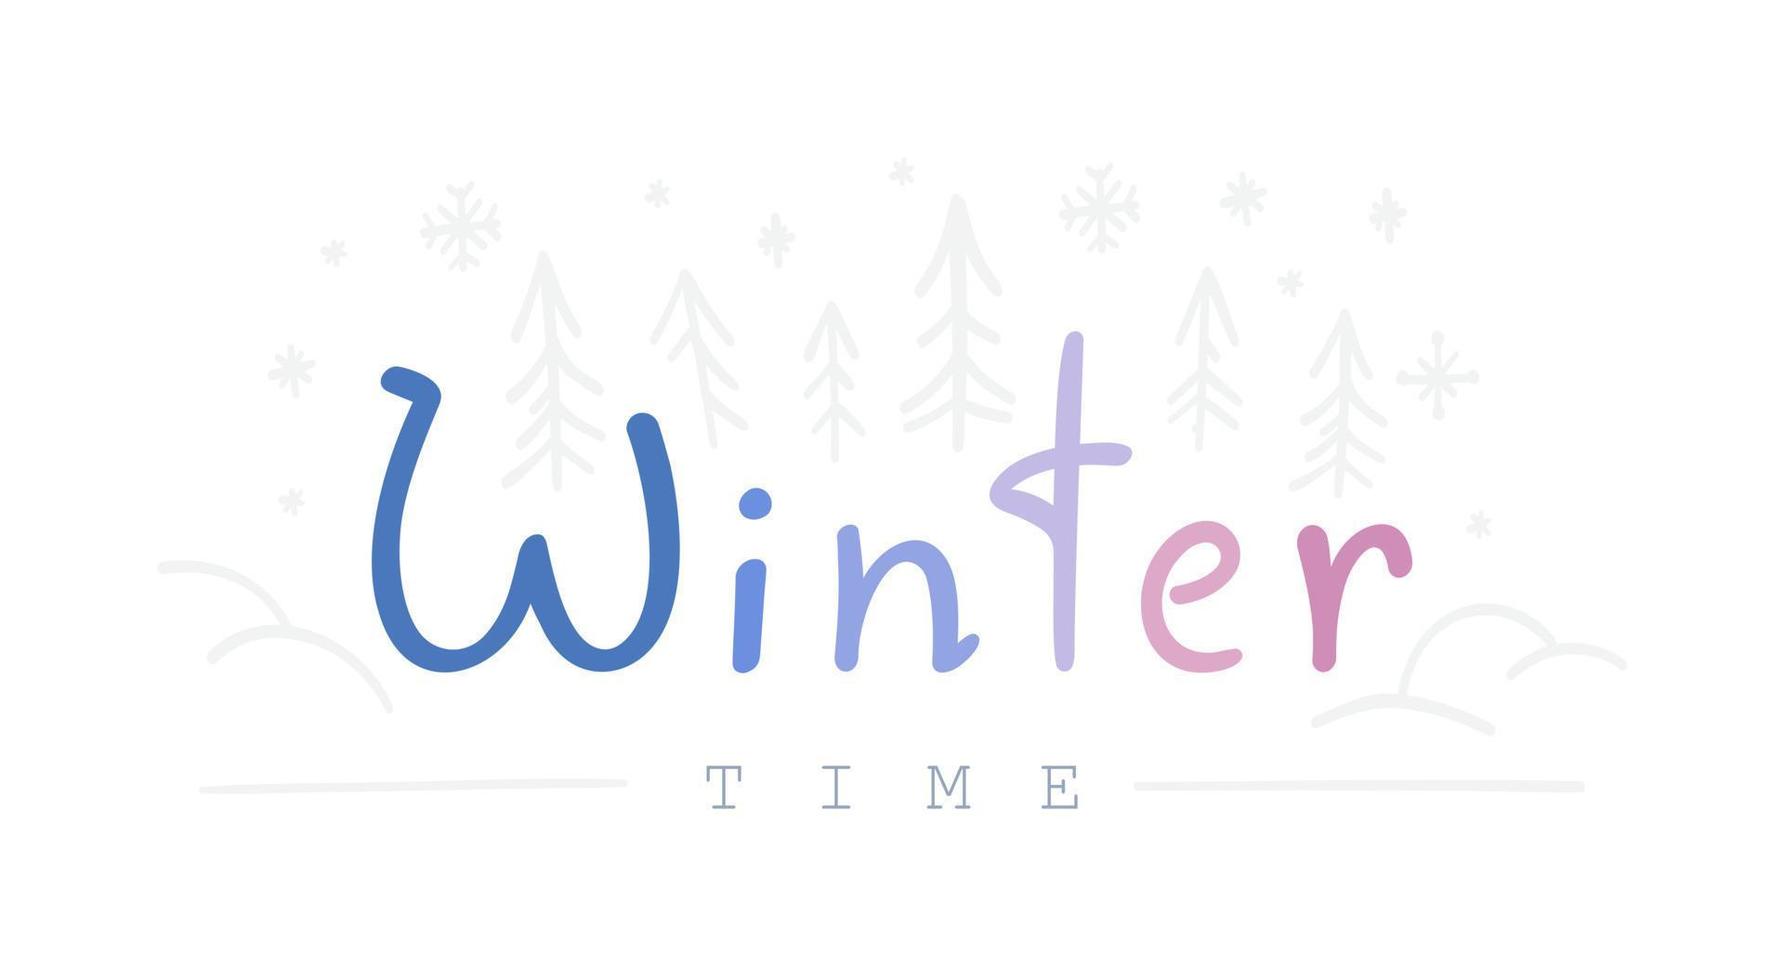 Typography. Winter. The cold lettering of winter. Vector illustration of blue lettering on white background.